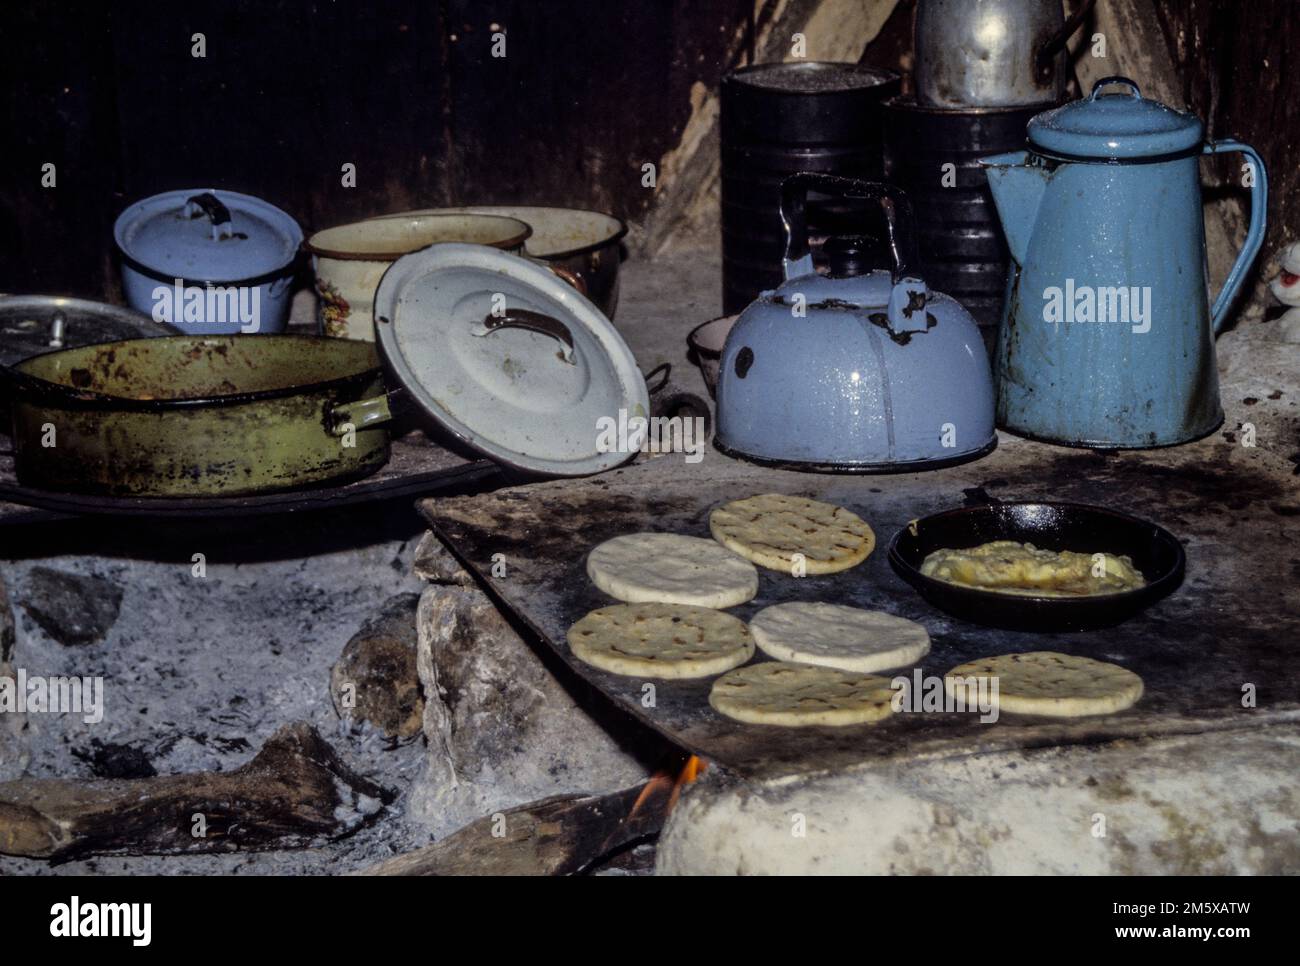 Honduras, San Luis Planes.  Cooking Tortillas over a Wood Fire in a Local Kitchen. Stock Photo